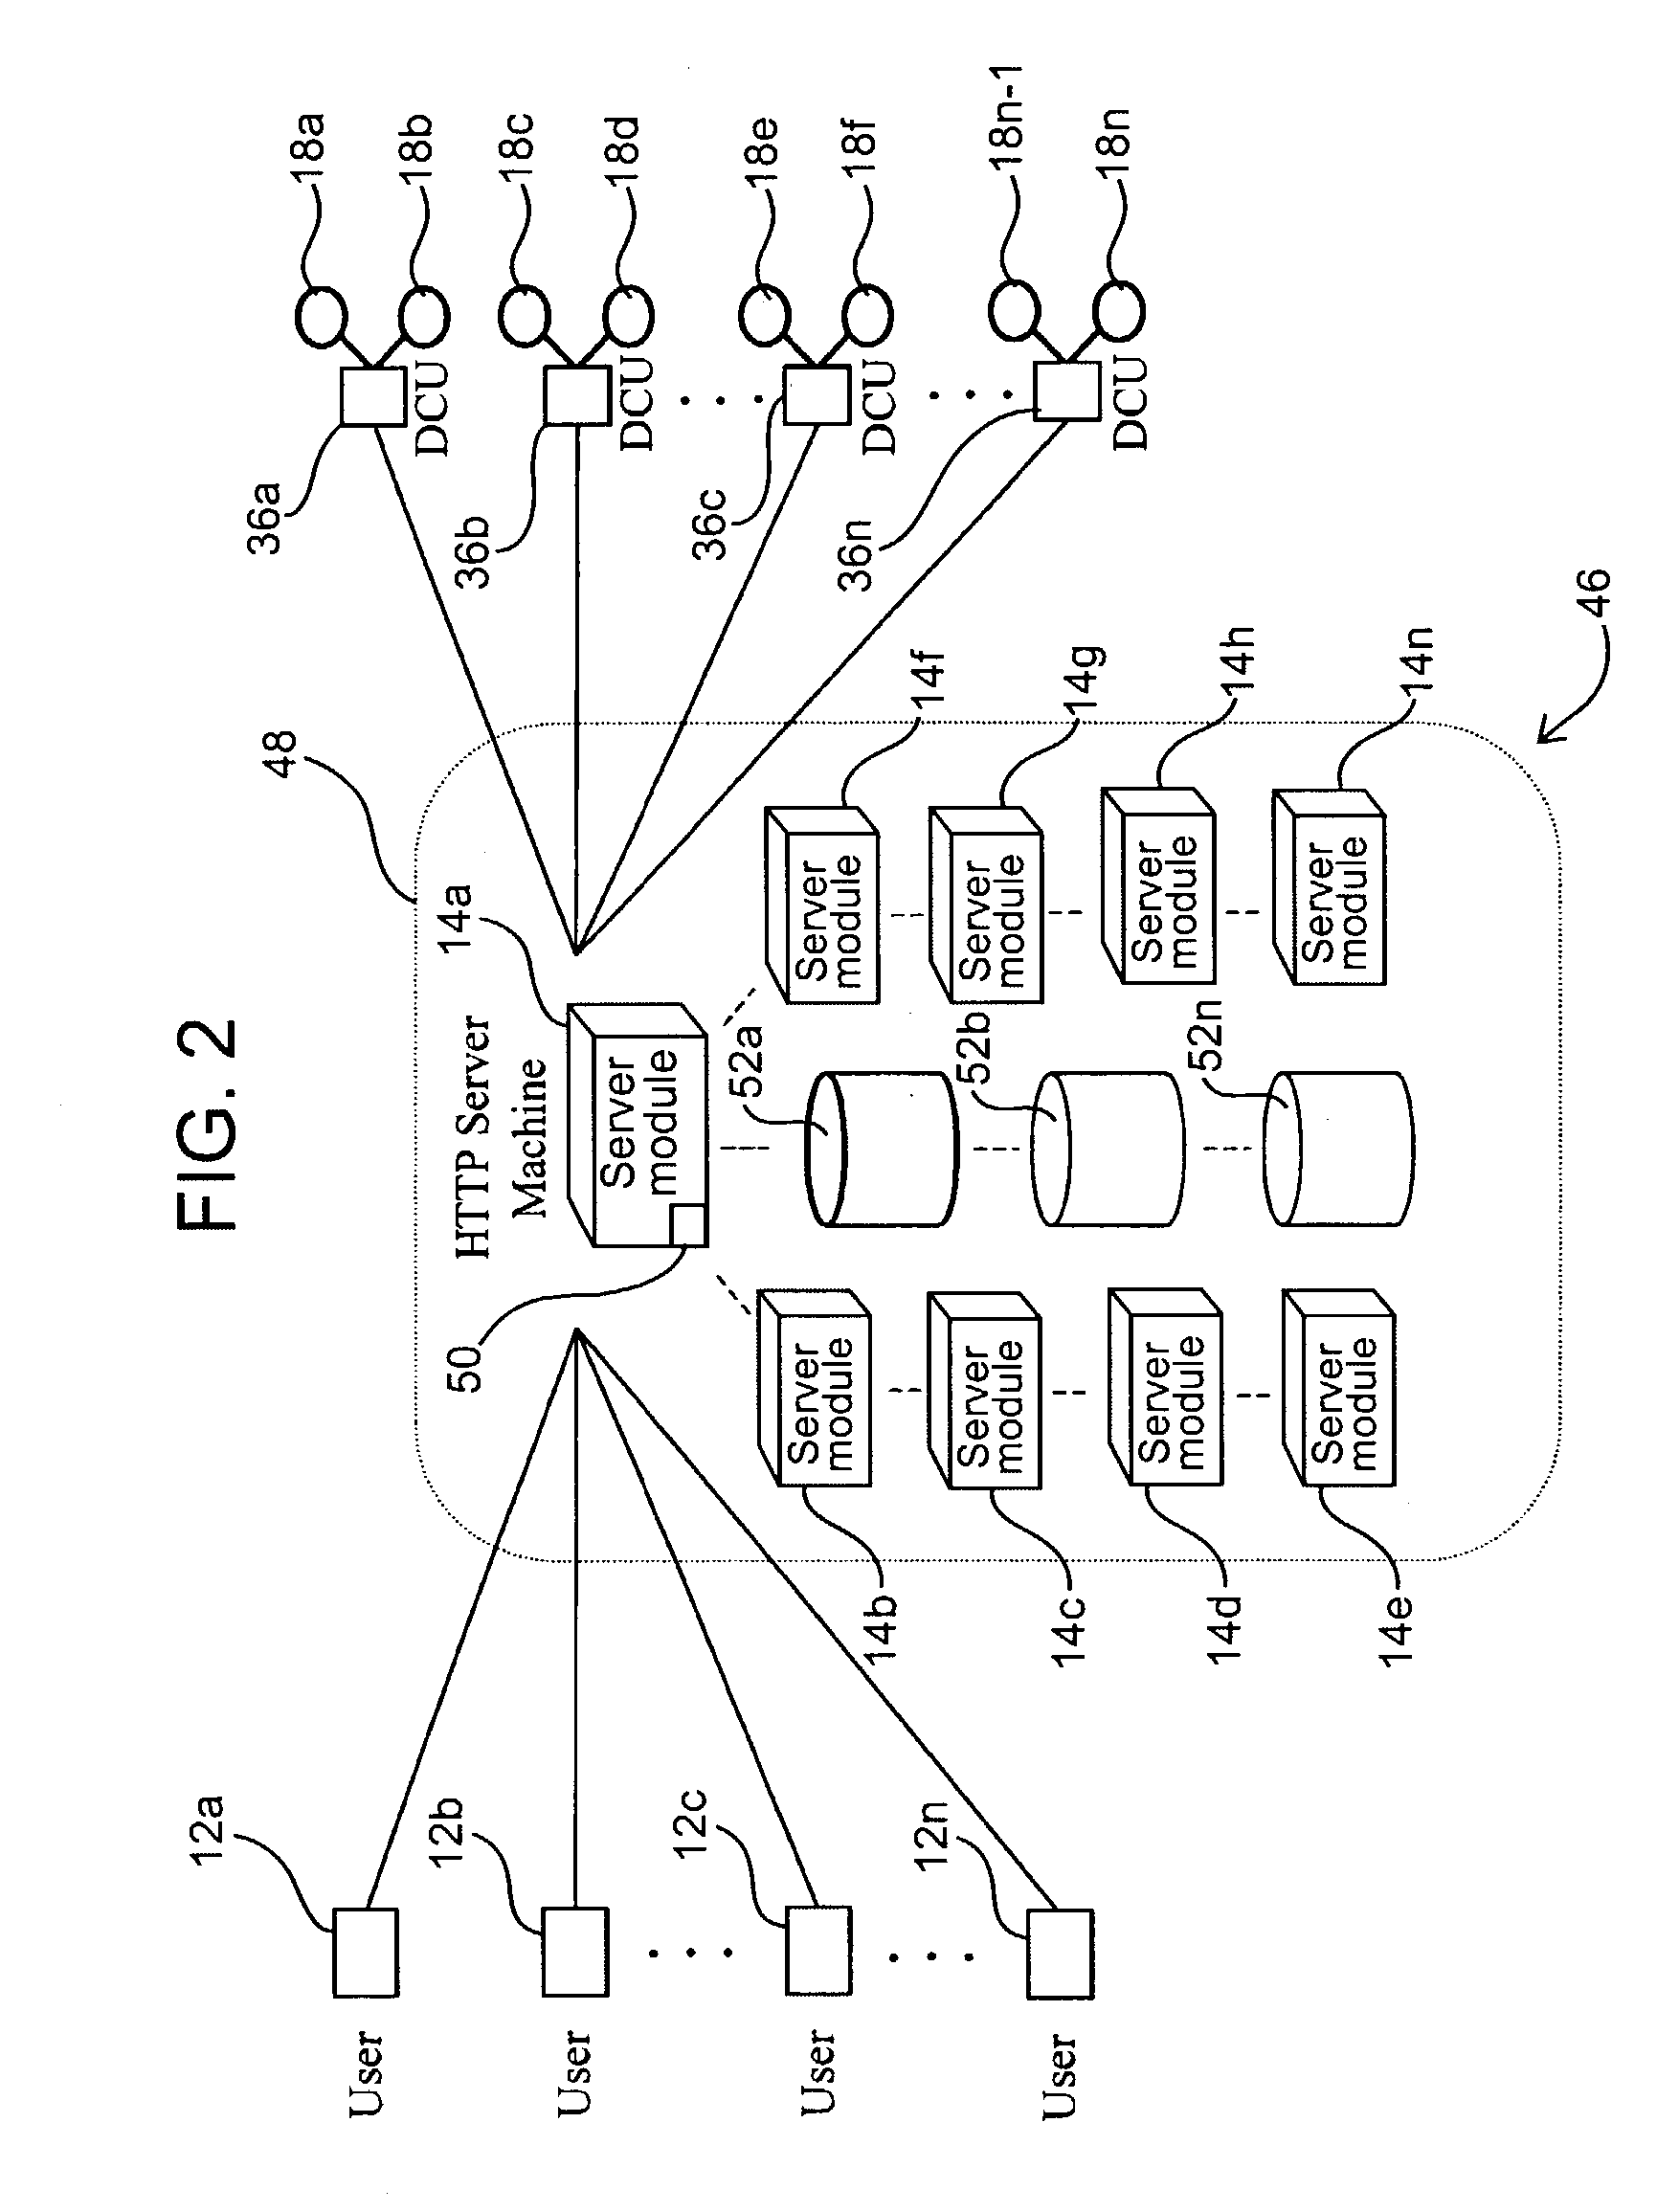 Access and control system for network-enabled devices